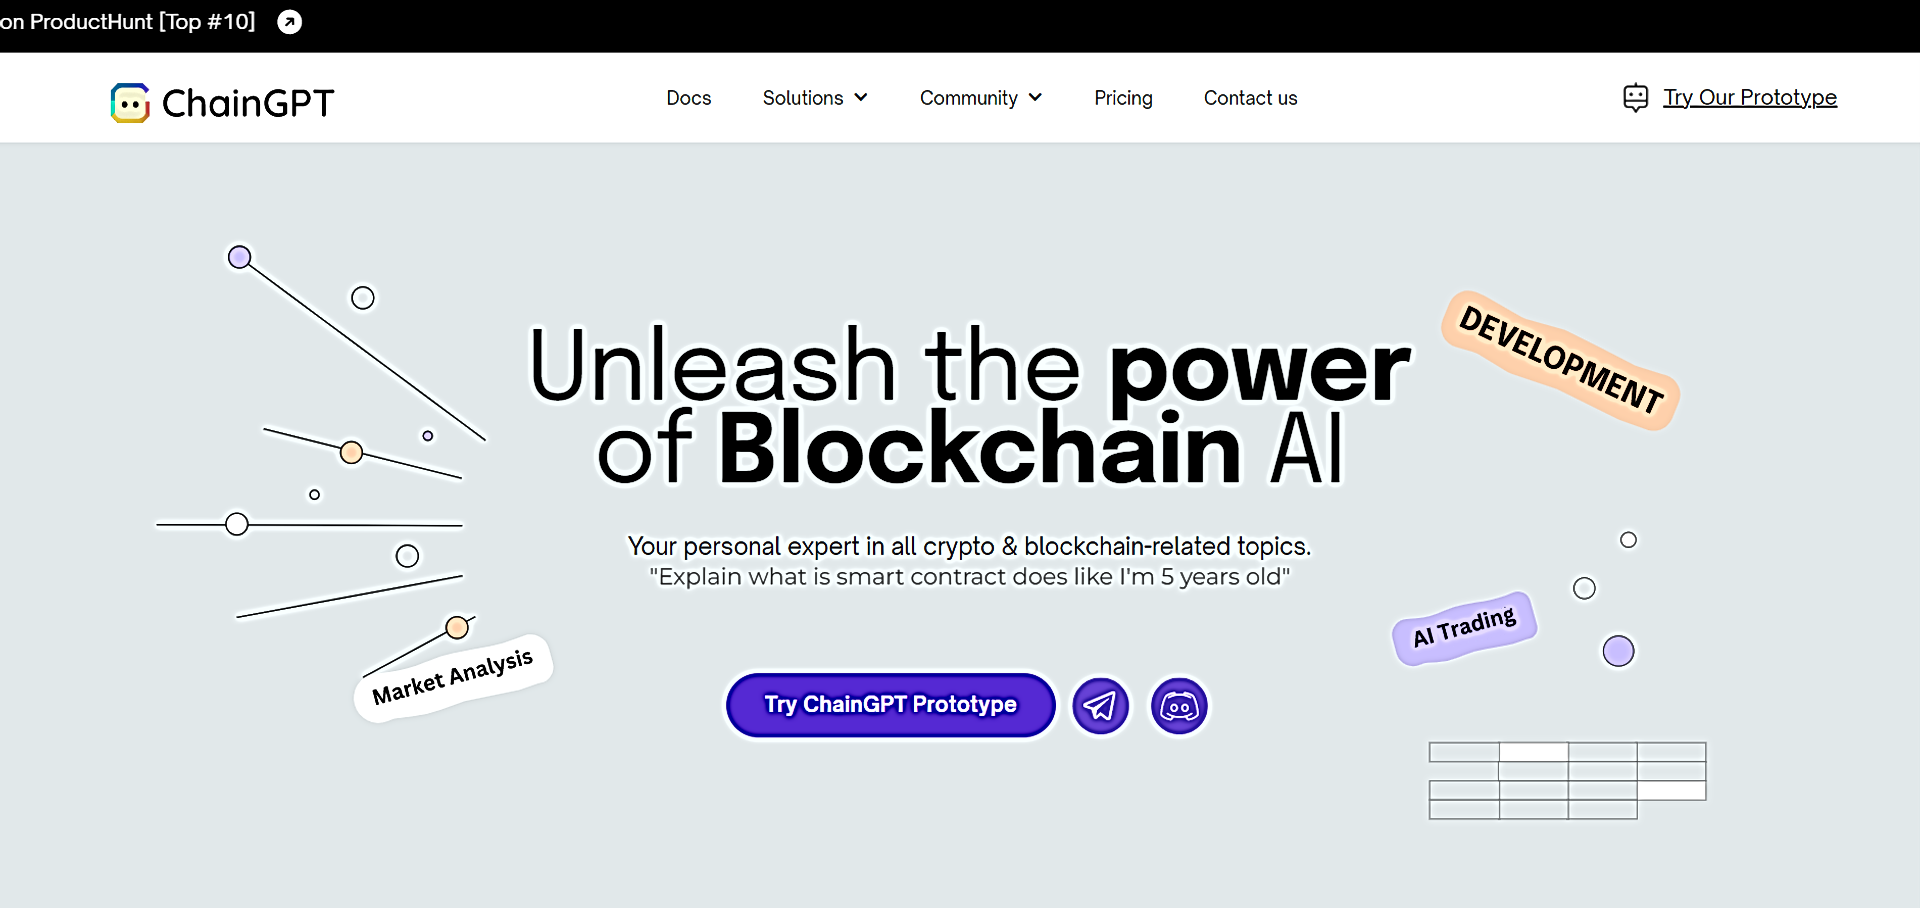 ChainGPT featured